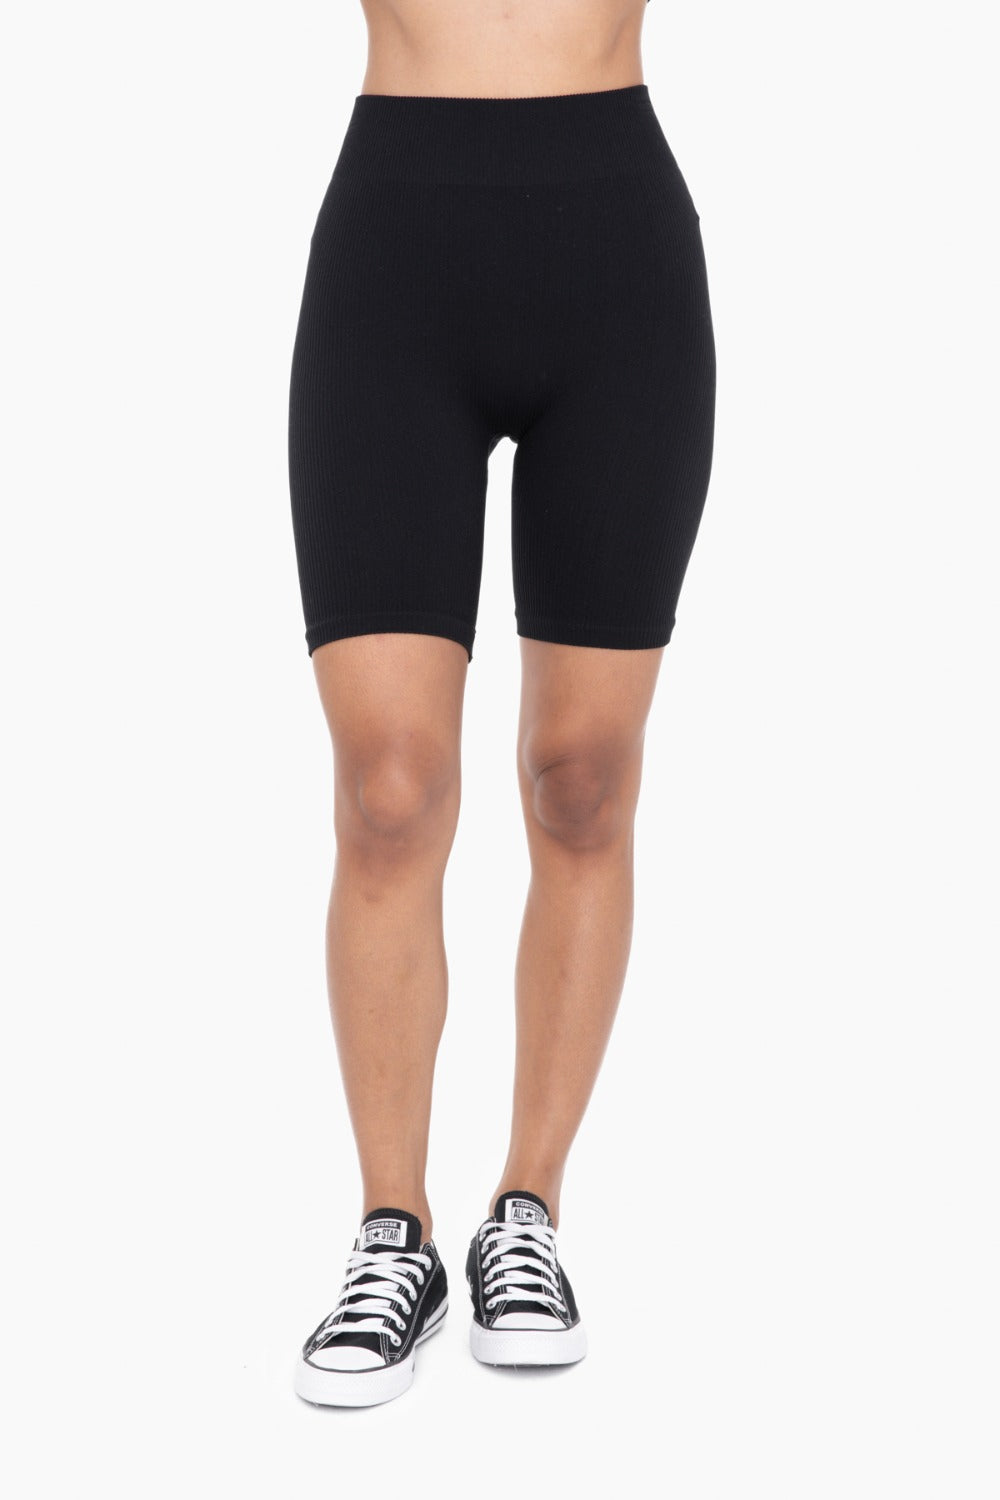 ACTIVE WEAR BIKE TIGHTS - APH3246